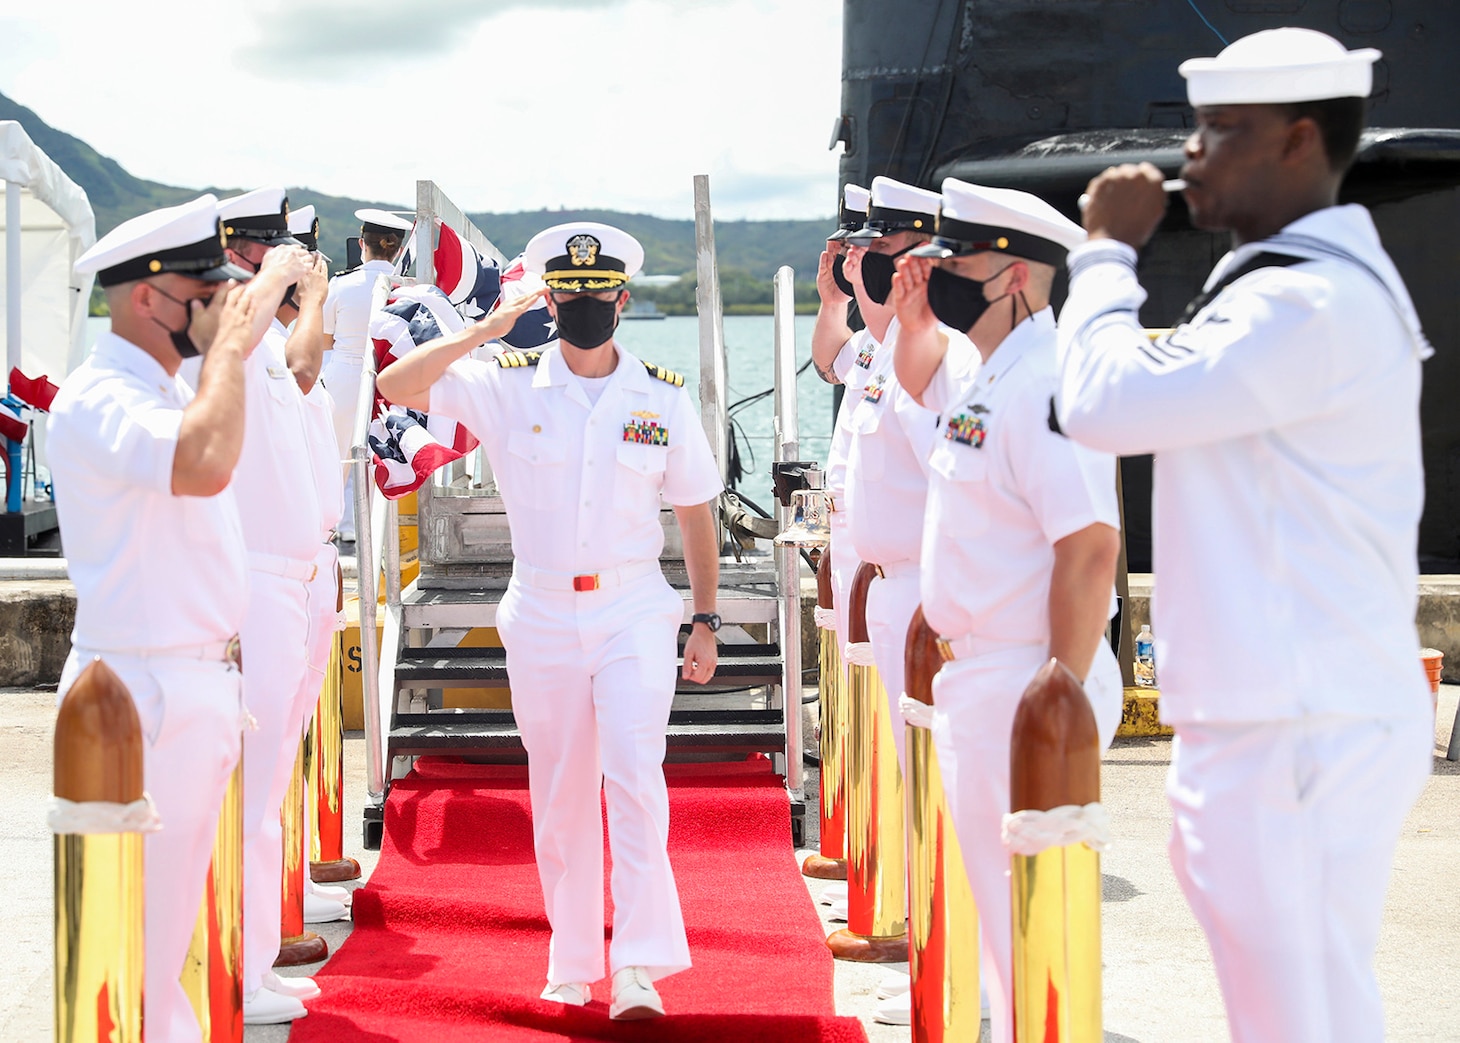 NAVAL BASE GUAM (Sept. 3, 2021) Cmdr. Sean Welch, from Colonie, New York, passes through side boys during a change of command ceremony for the Los Angeles-class fast-attack submarine USS Oklahoma City (SSN 723), Sept. 3. Welch relieved Cmdr. Steven Lawrence, from Bridgeport, Pennsylvania, as Oklahoma City’s commanding officer during a ceremony held aboard the submarine. (U.S. Navy photo by Mass Communication Specialist 1st Class Jordyn Diomede)